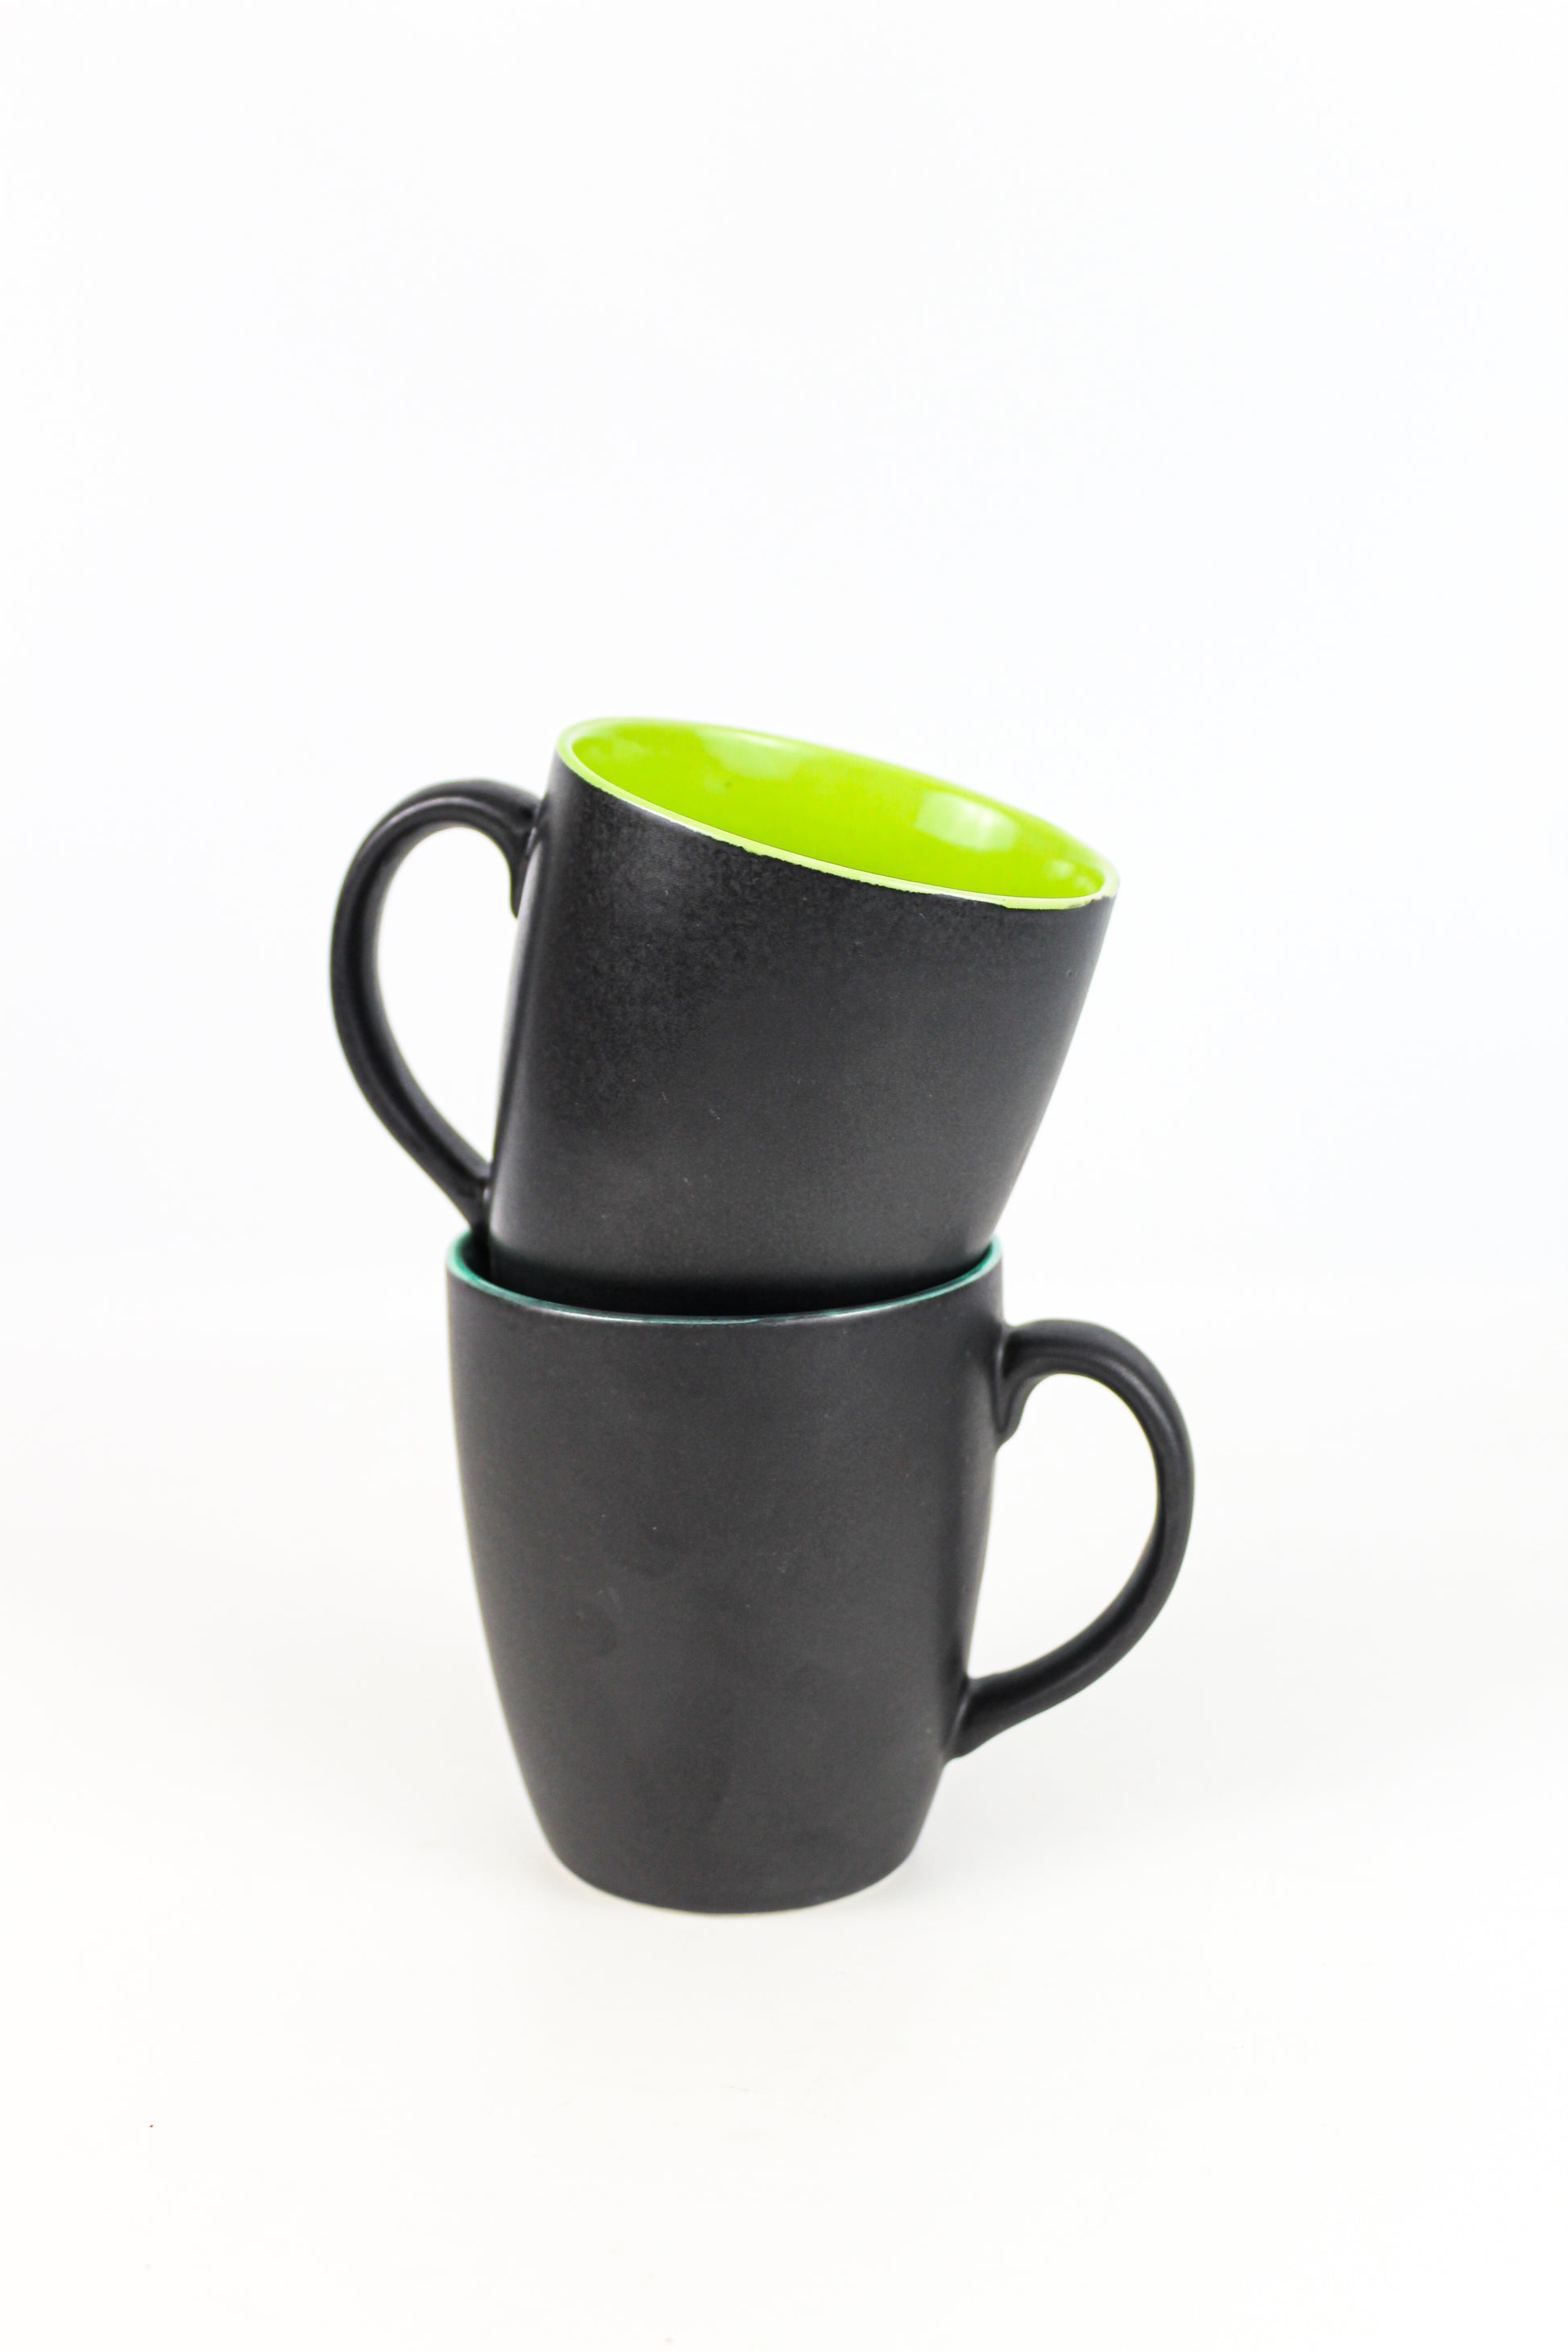 l'heure du cafe - Leaf Green/Turqoise Handcrafted Ceramic Coffee Mugs 